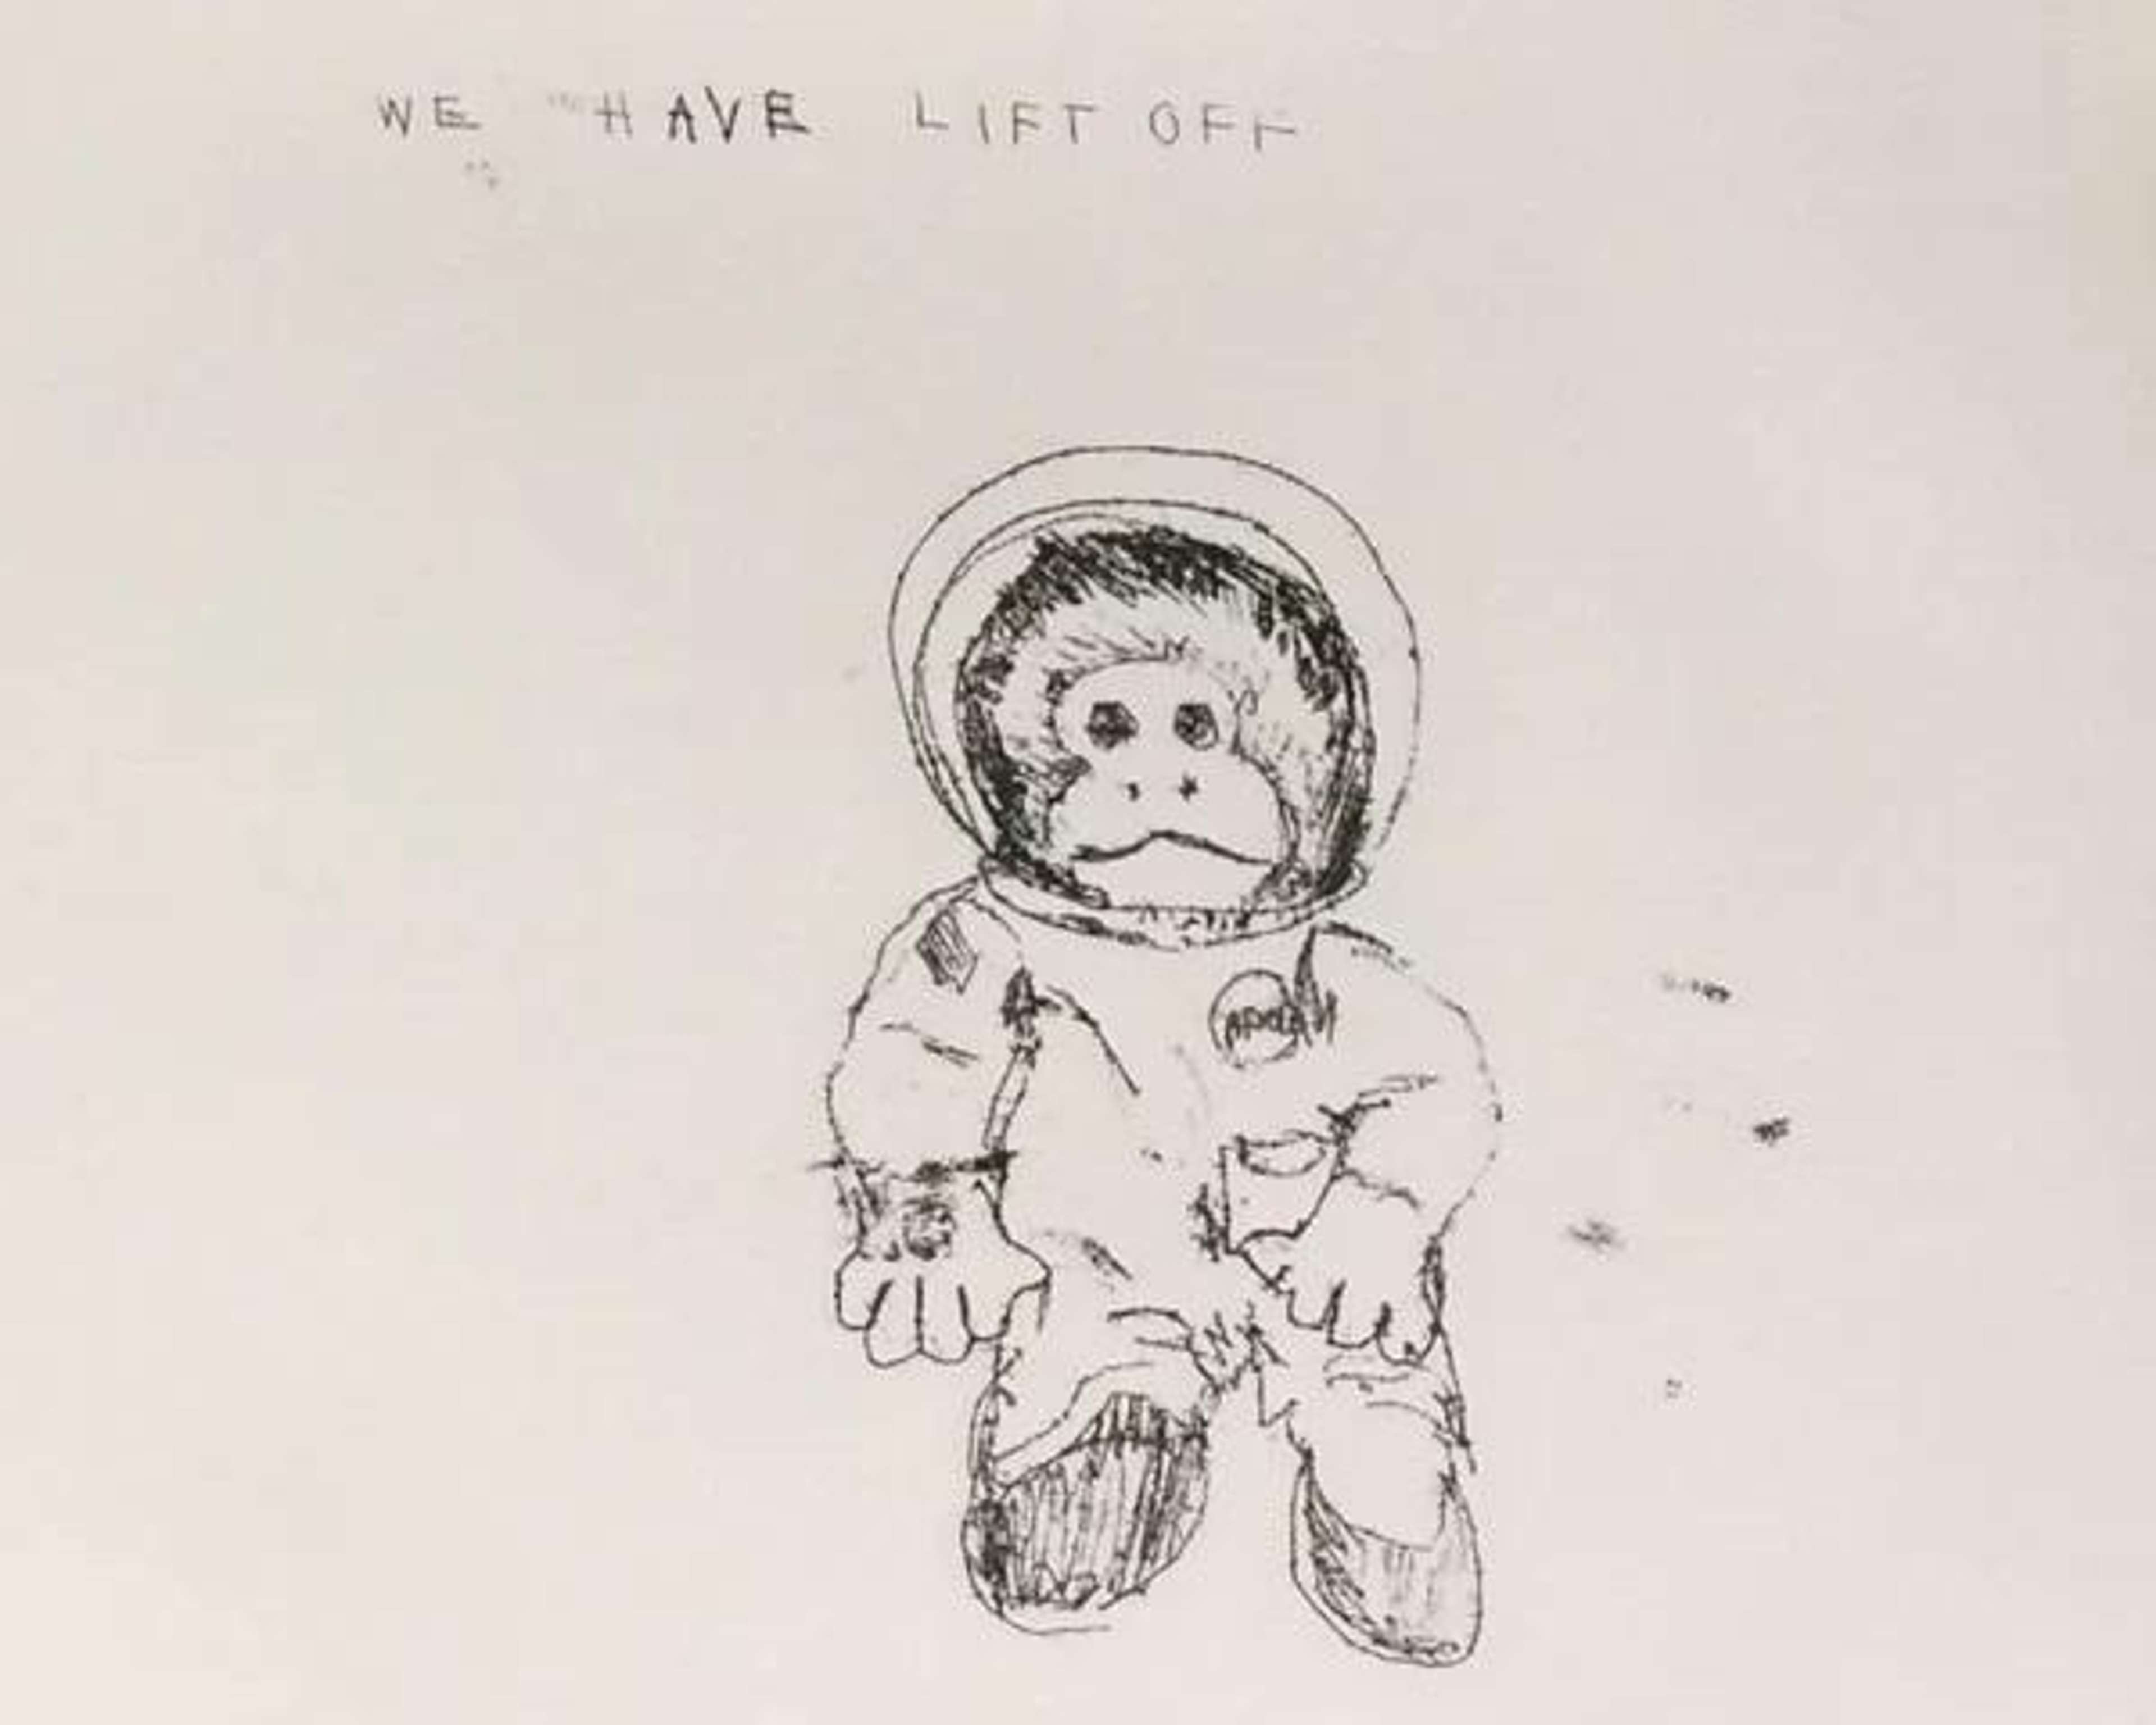 Space Monkey - Signed Print